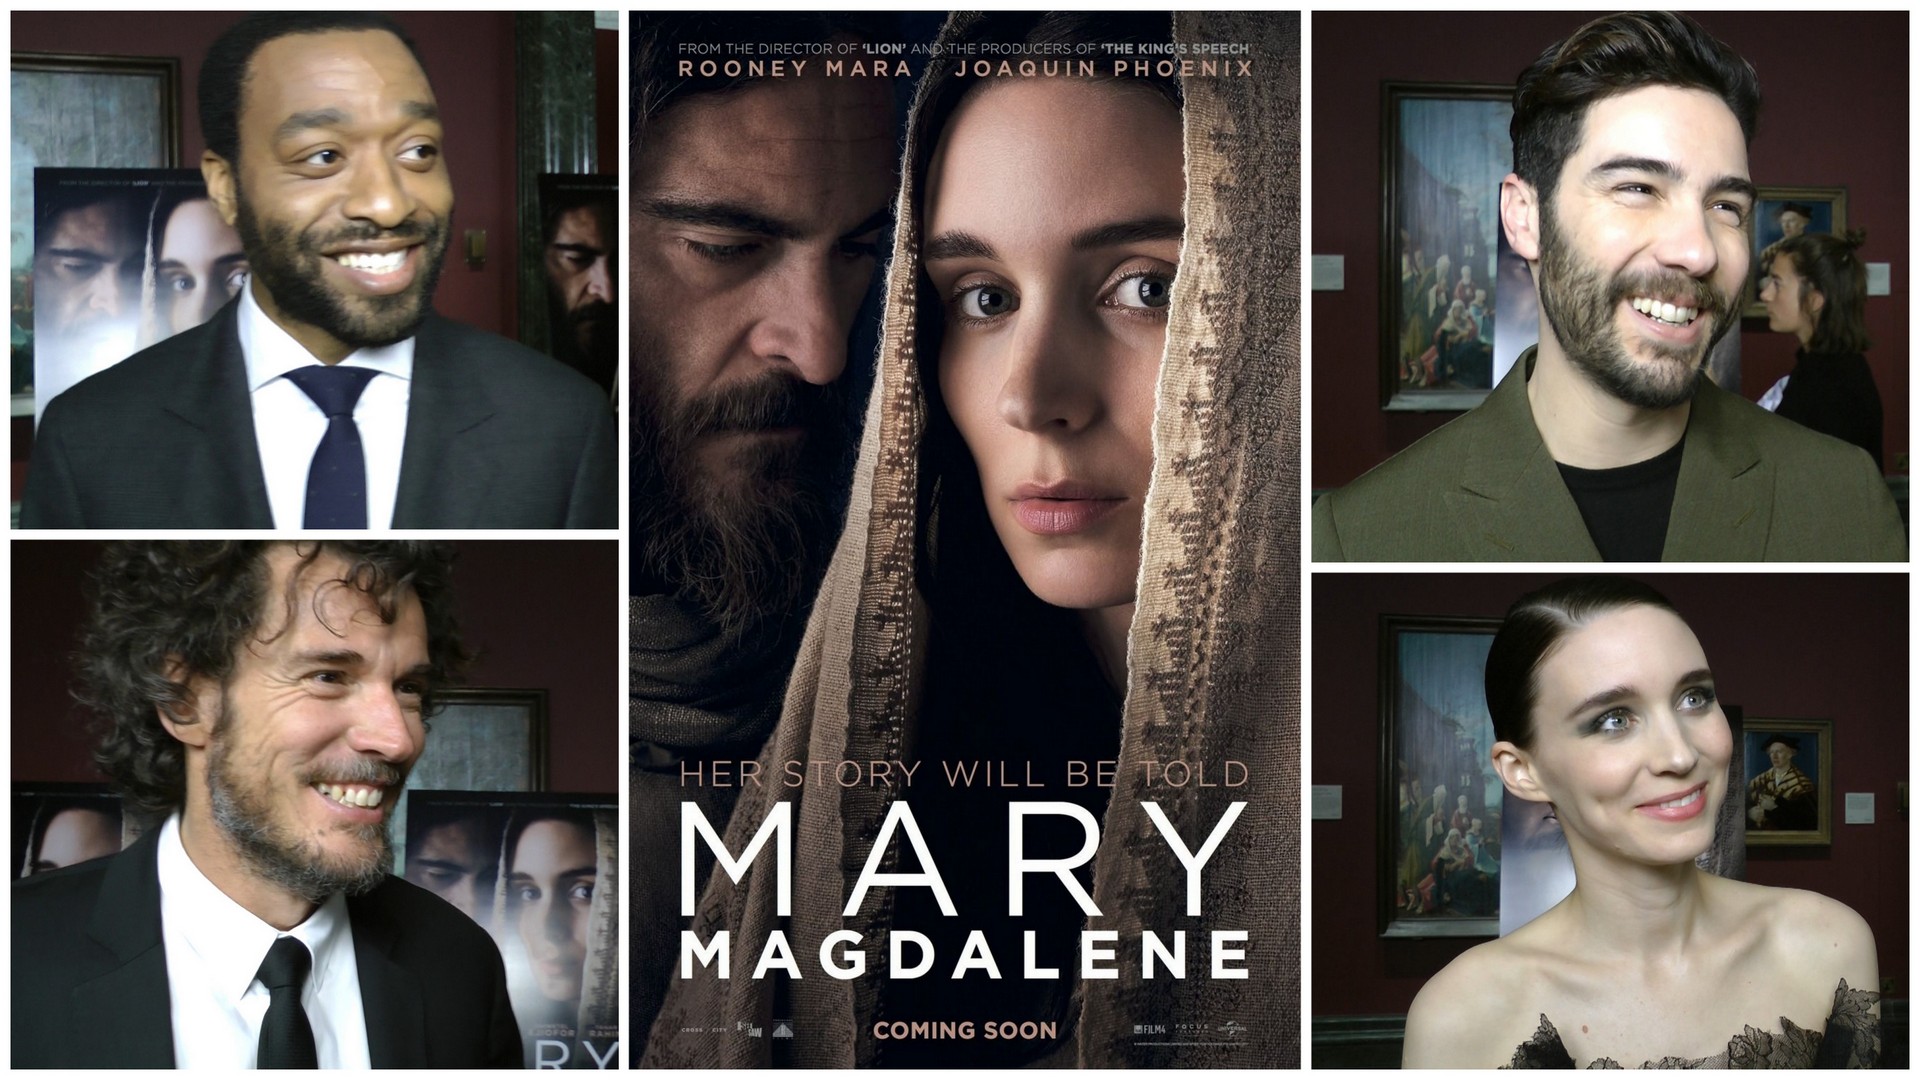 Mary Magdalene premiere